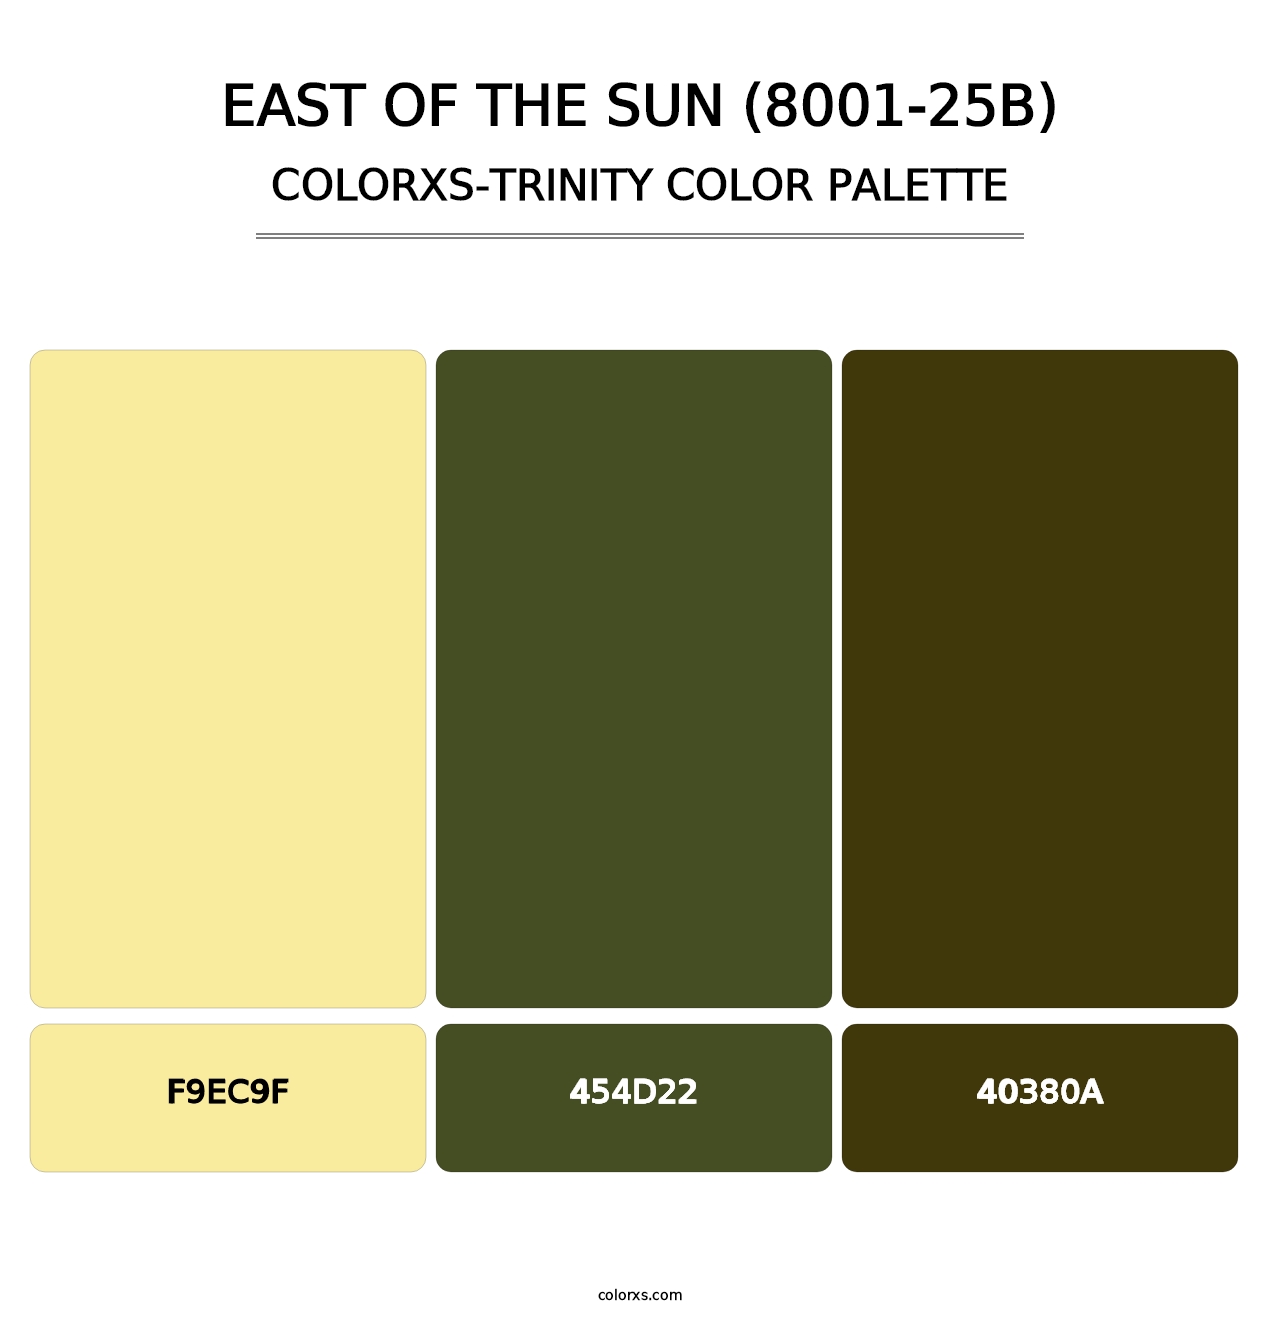 East of the Sun (8001-25B) - Colorxs Trinity Palette